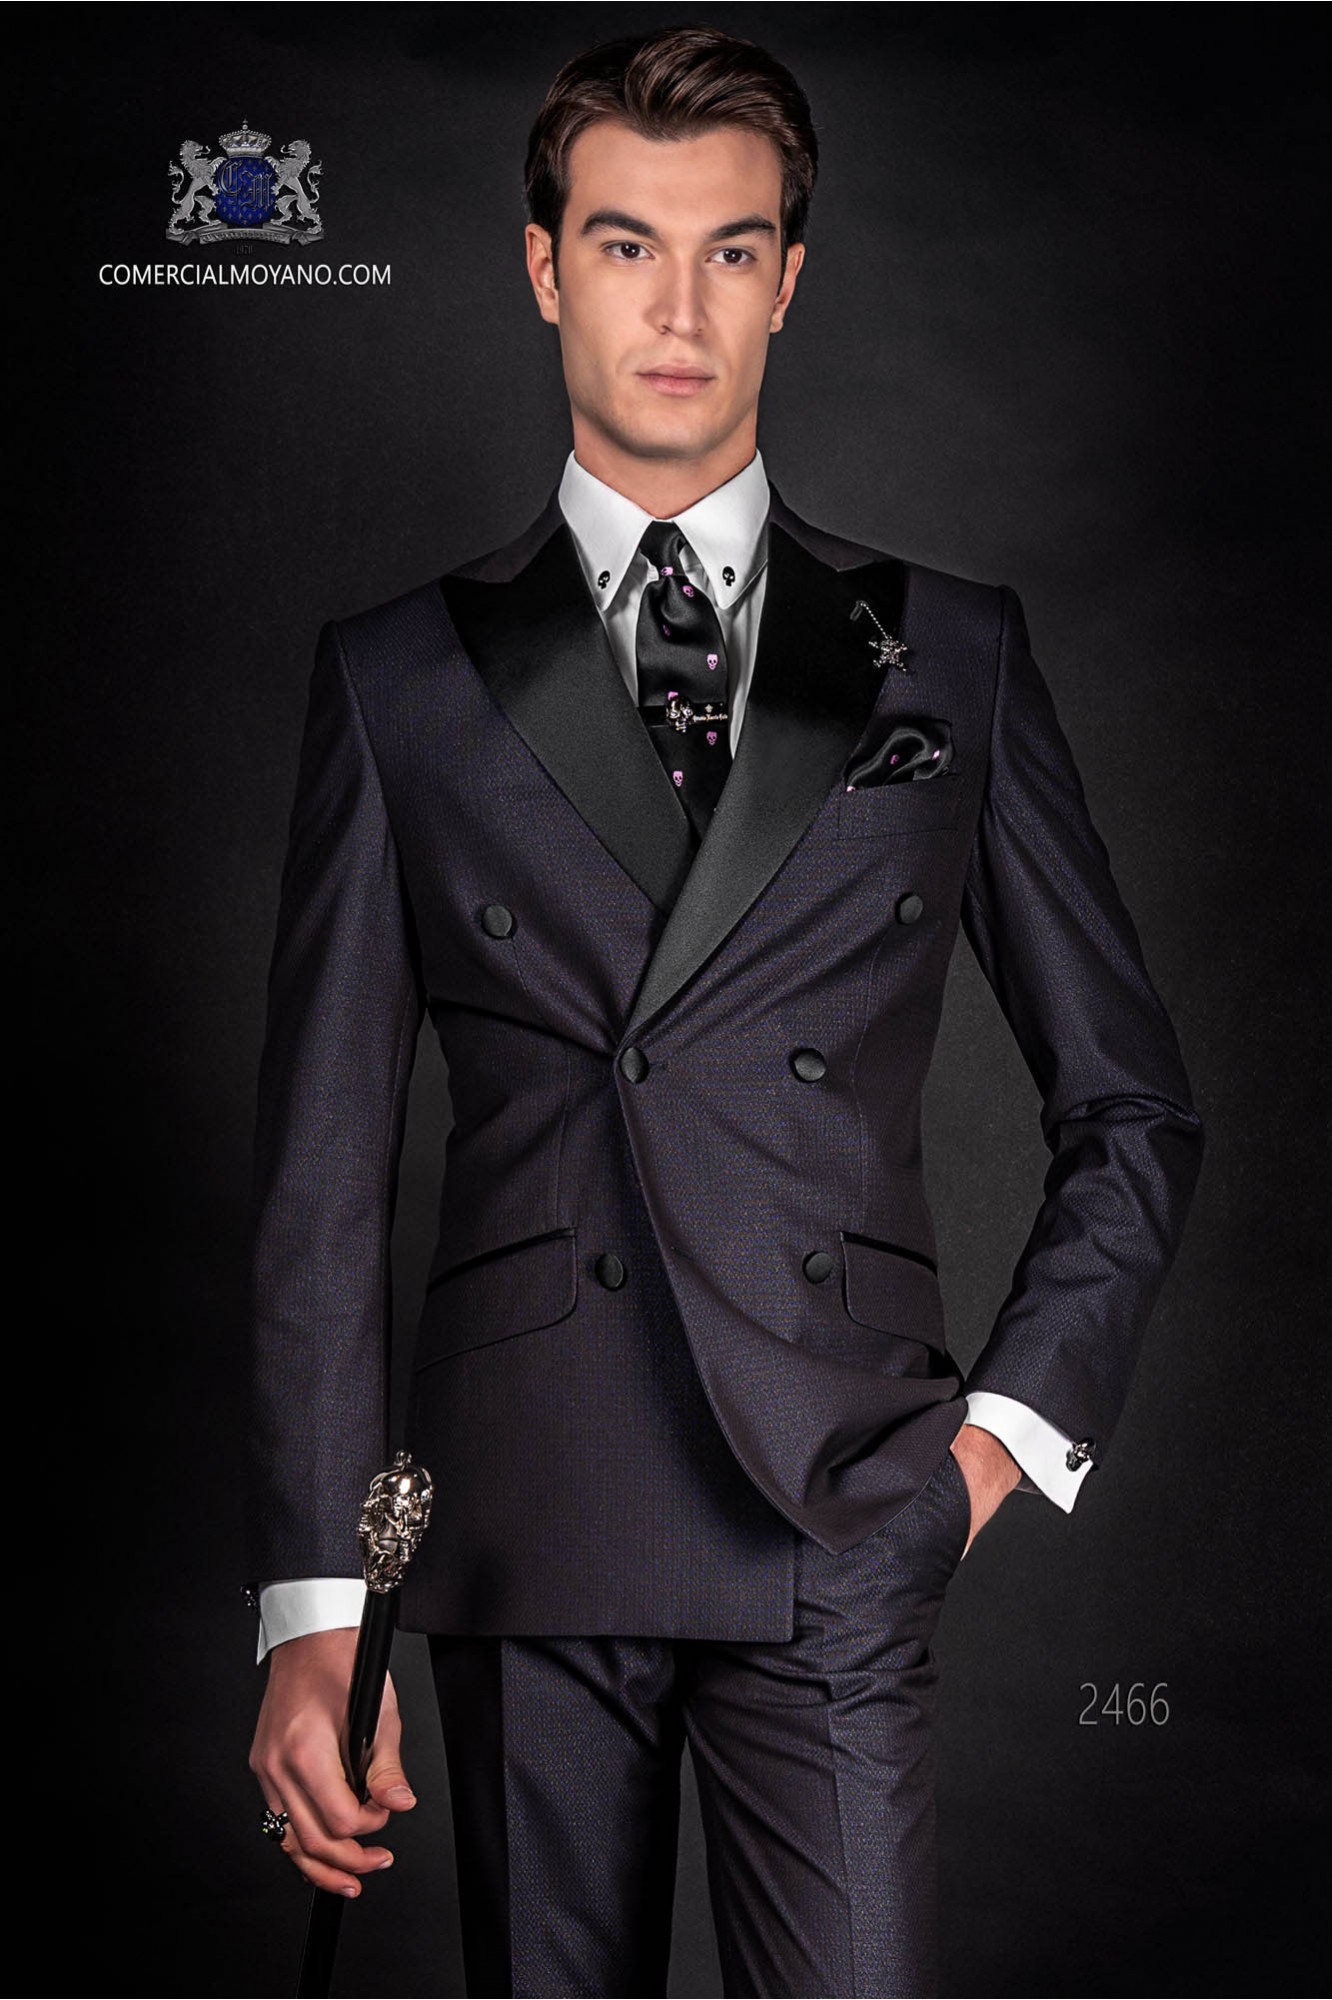 Italian black fashion double breasted suit Slim fit. Satin peak lapels and 6 buttons. Shiny fabric. model 2466 Mario Moyano